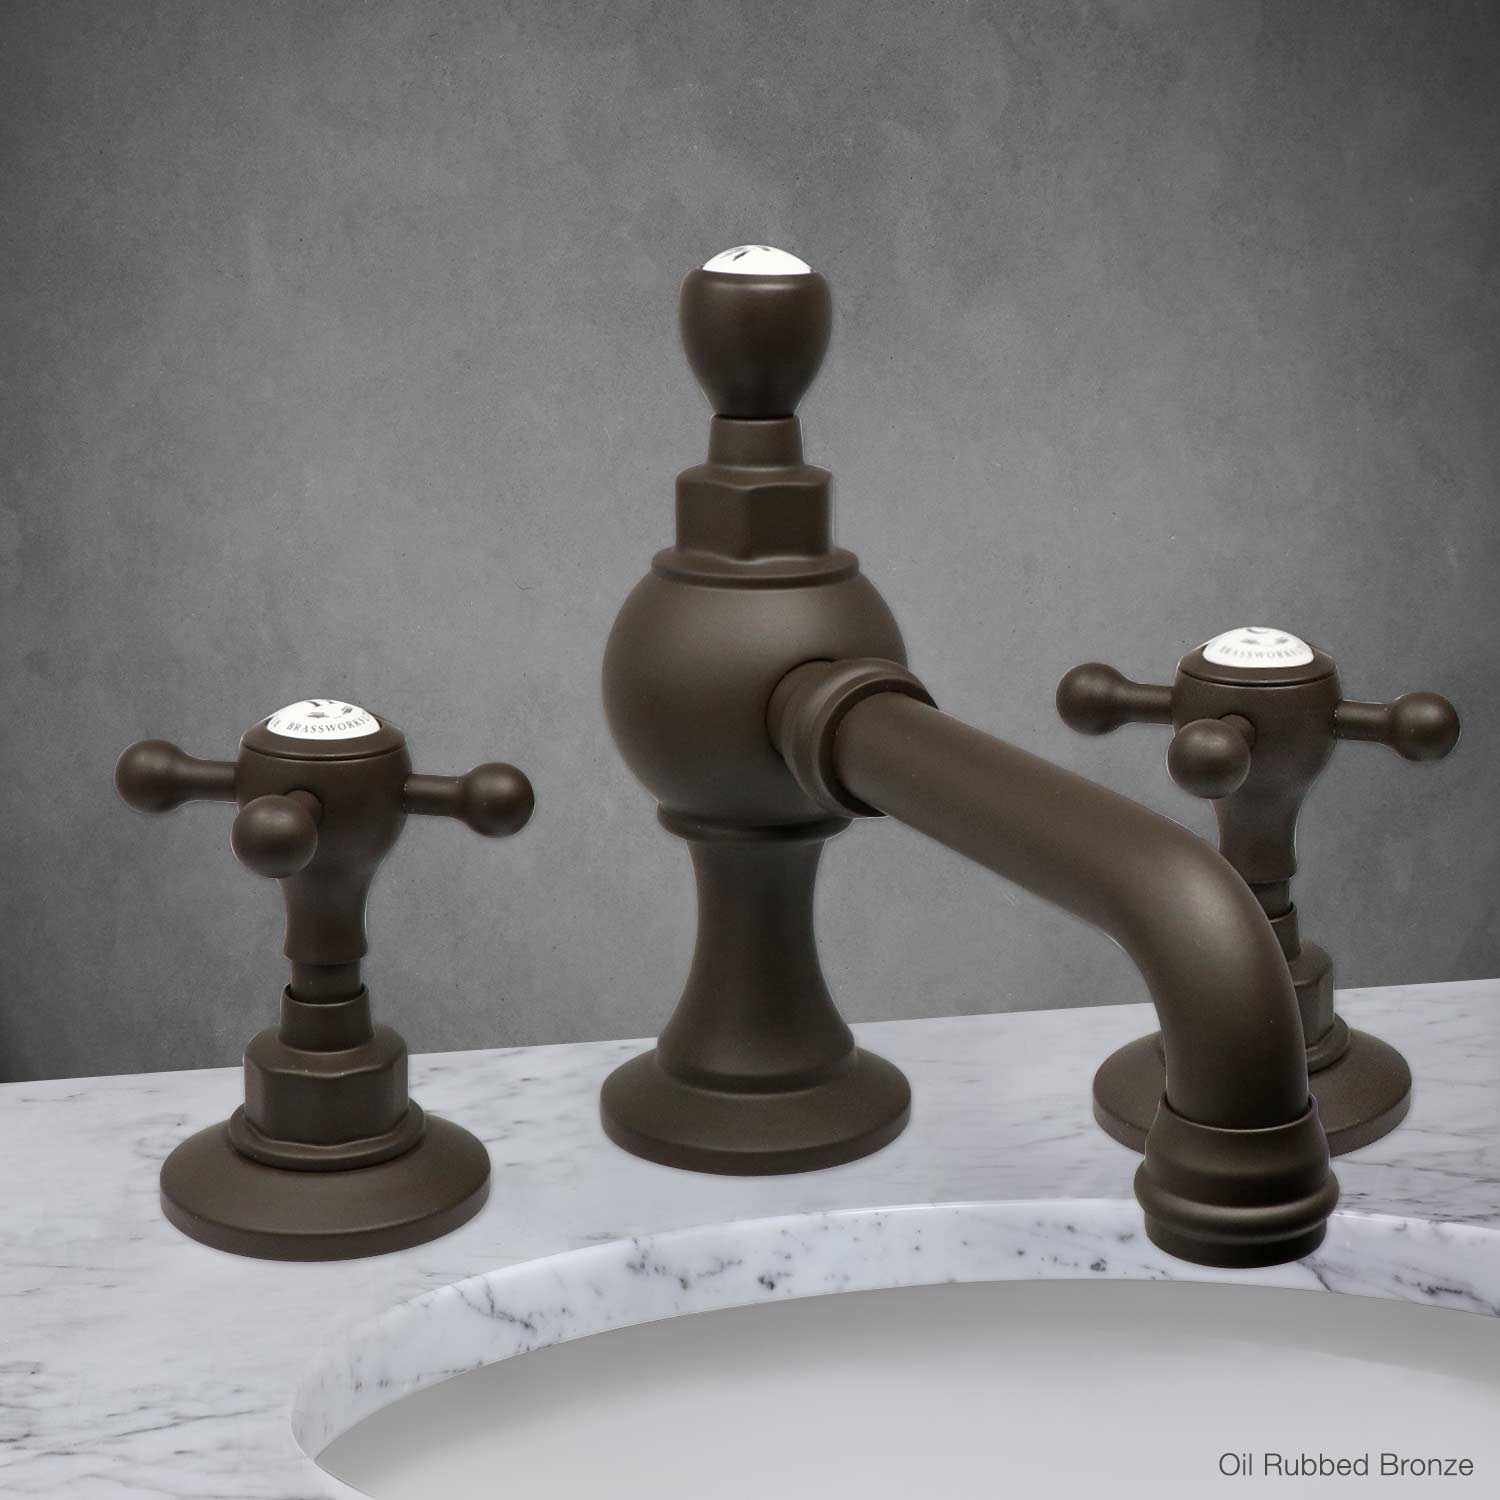 Pembroke Widespread Lavatory Faucet with Cross Handle in Oil Rubbed Bronze